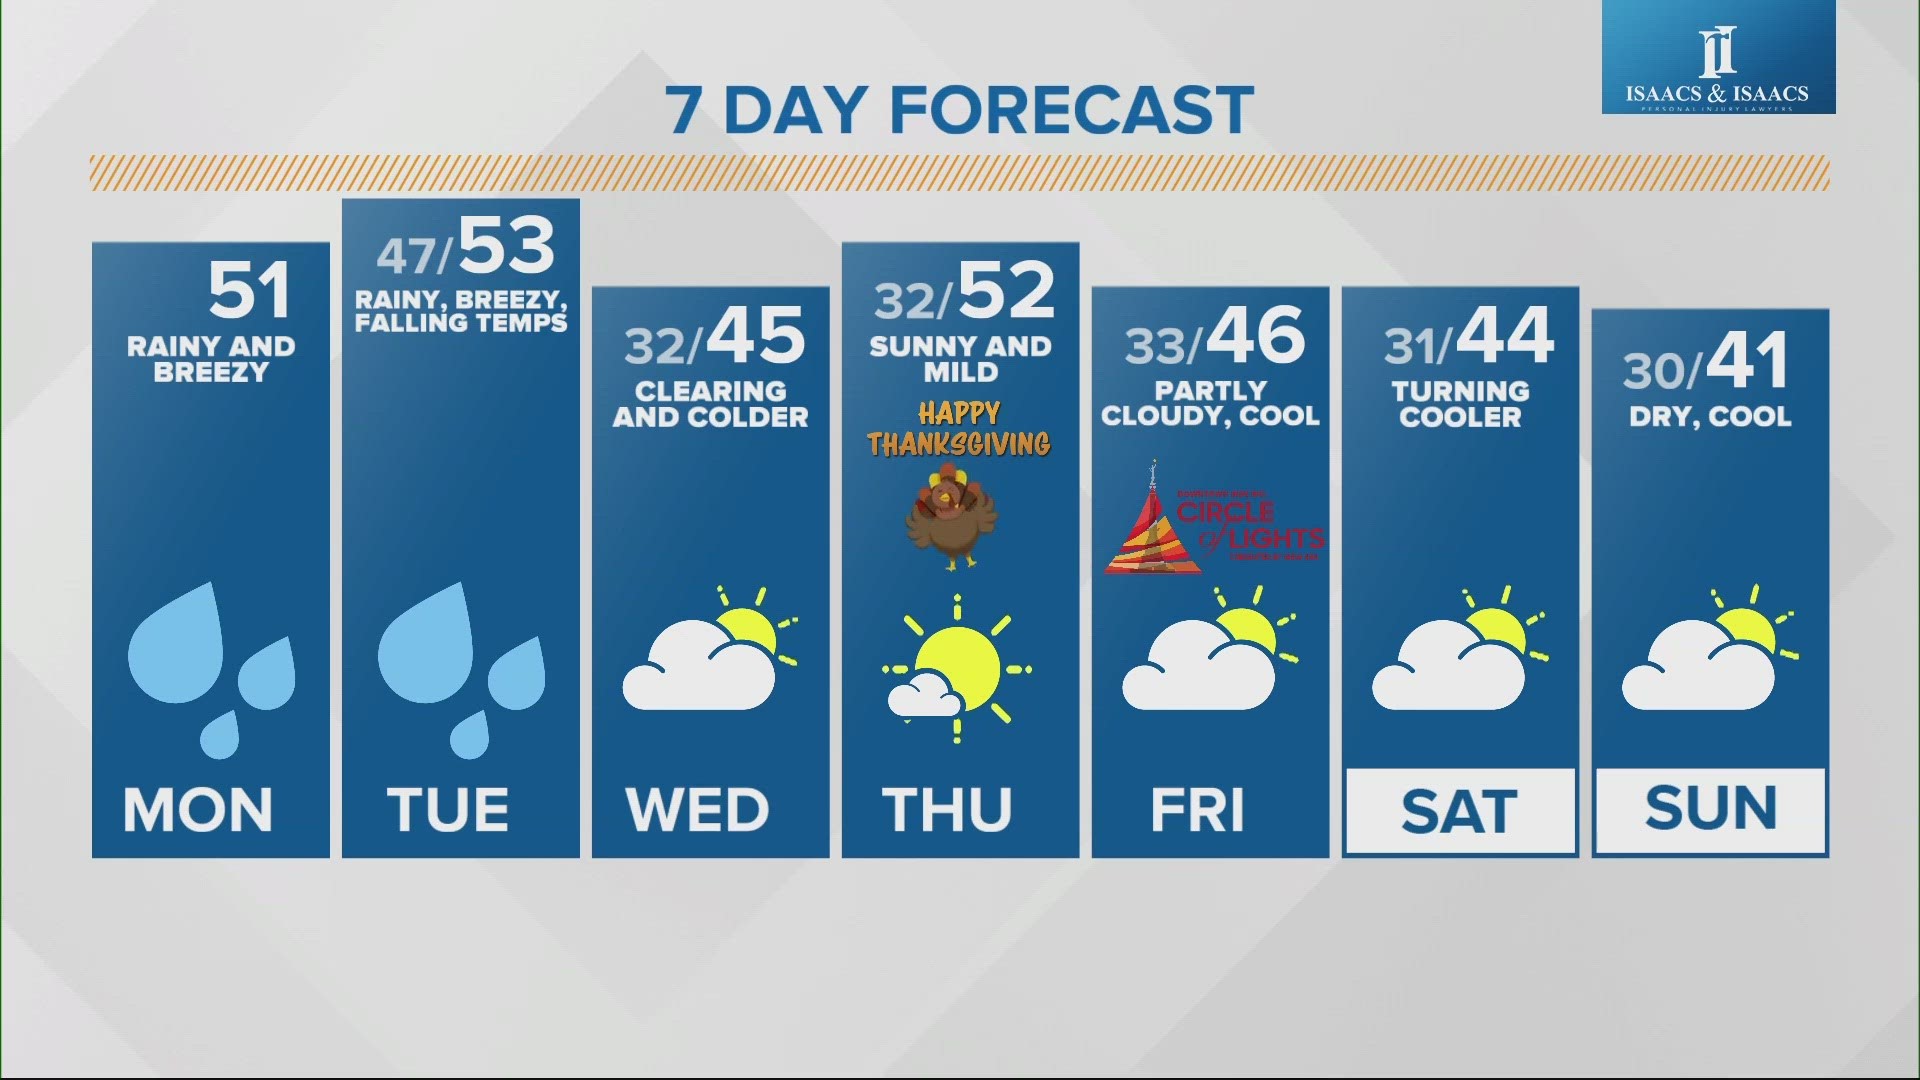 Slight chances of rain for today and tomorrow, but looking like a dry Thanksgiving.